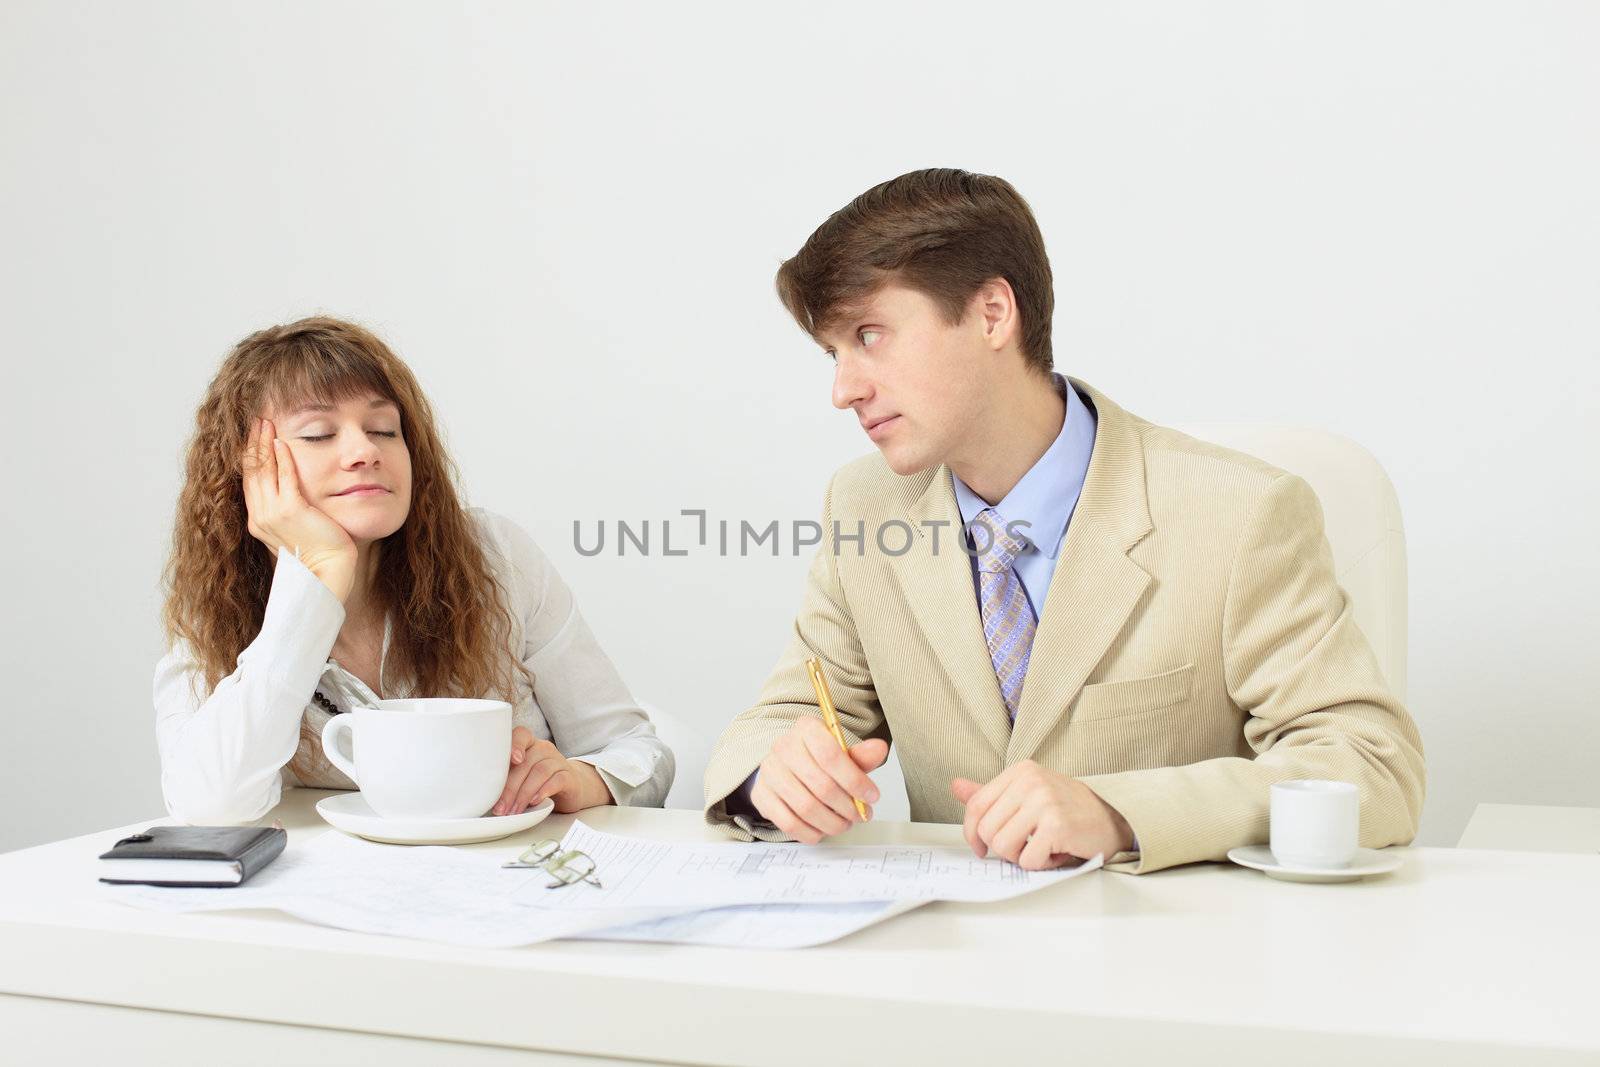 The woman falls asleep sitting at a table with a huge cup of coffee